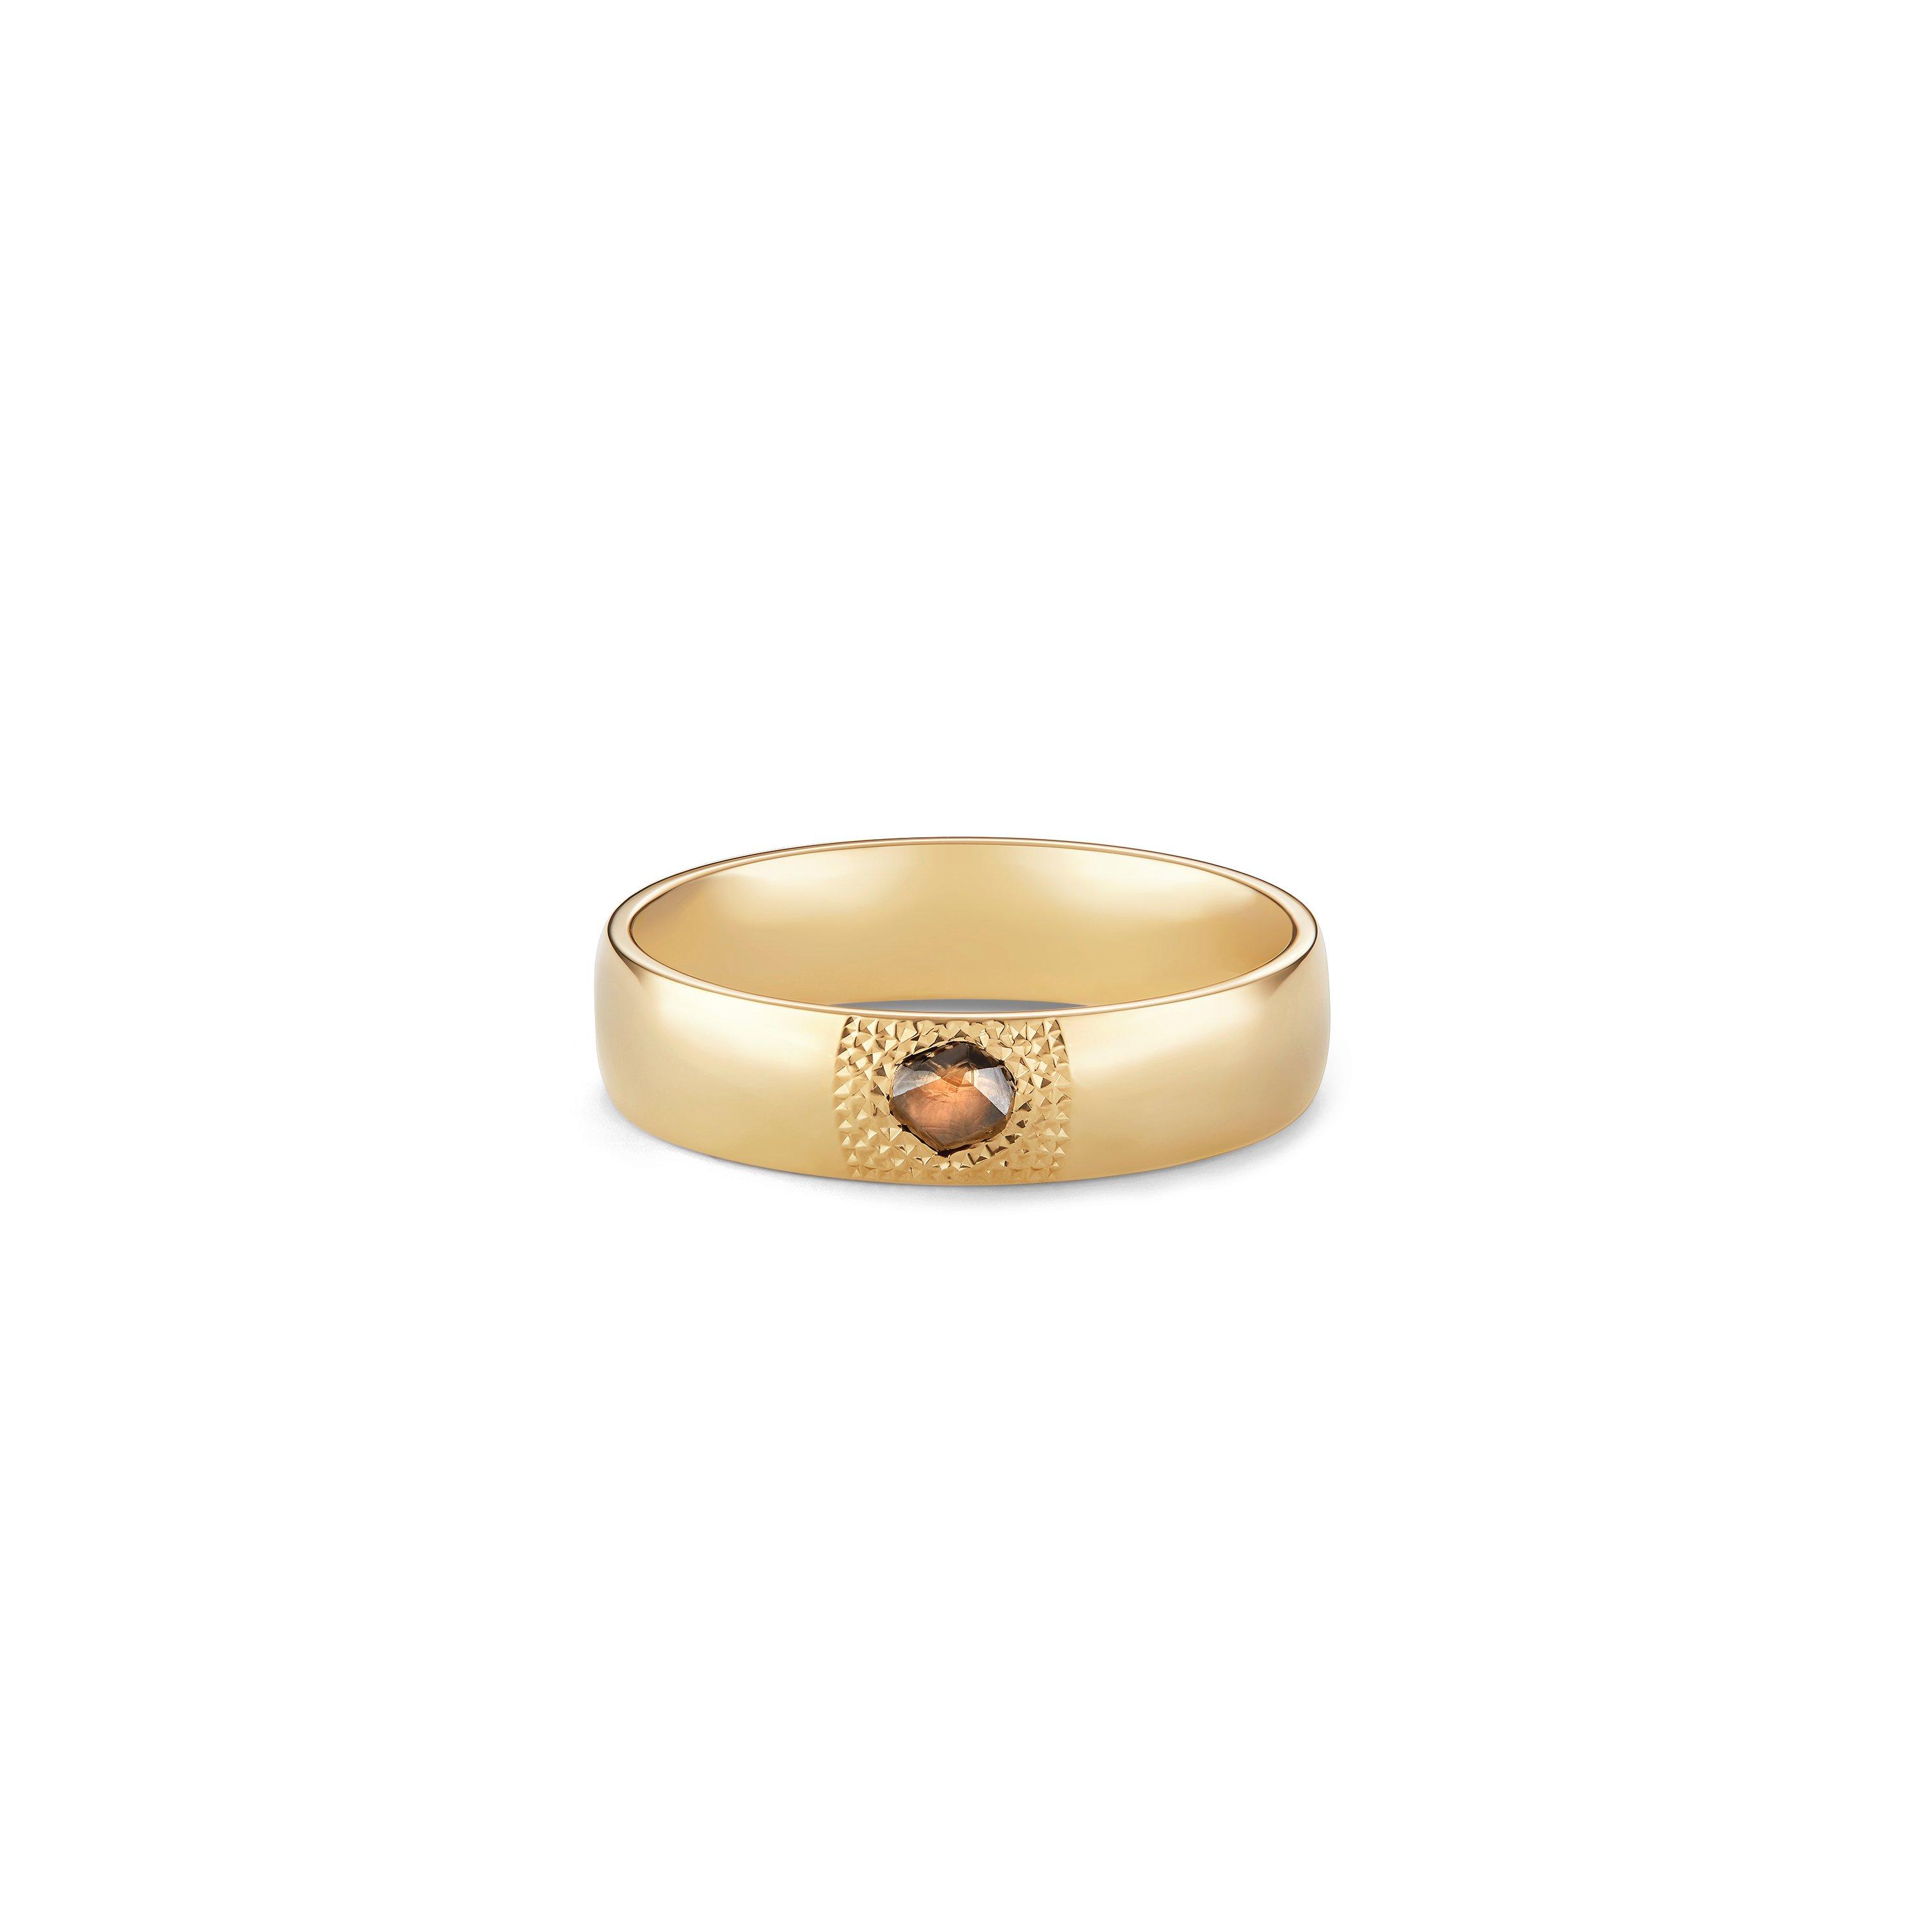 Talisman large band in yellow gold, image 1